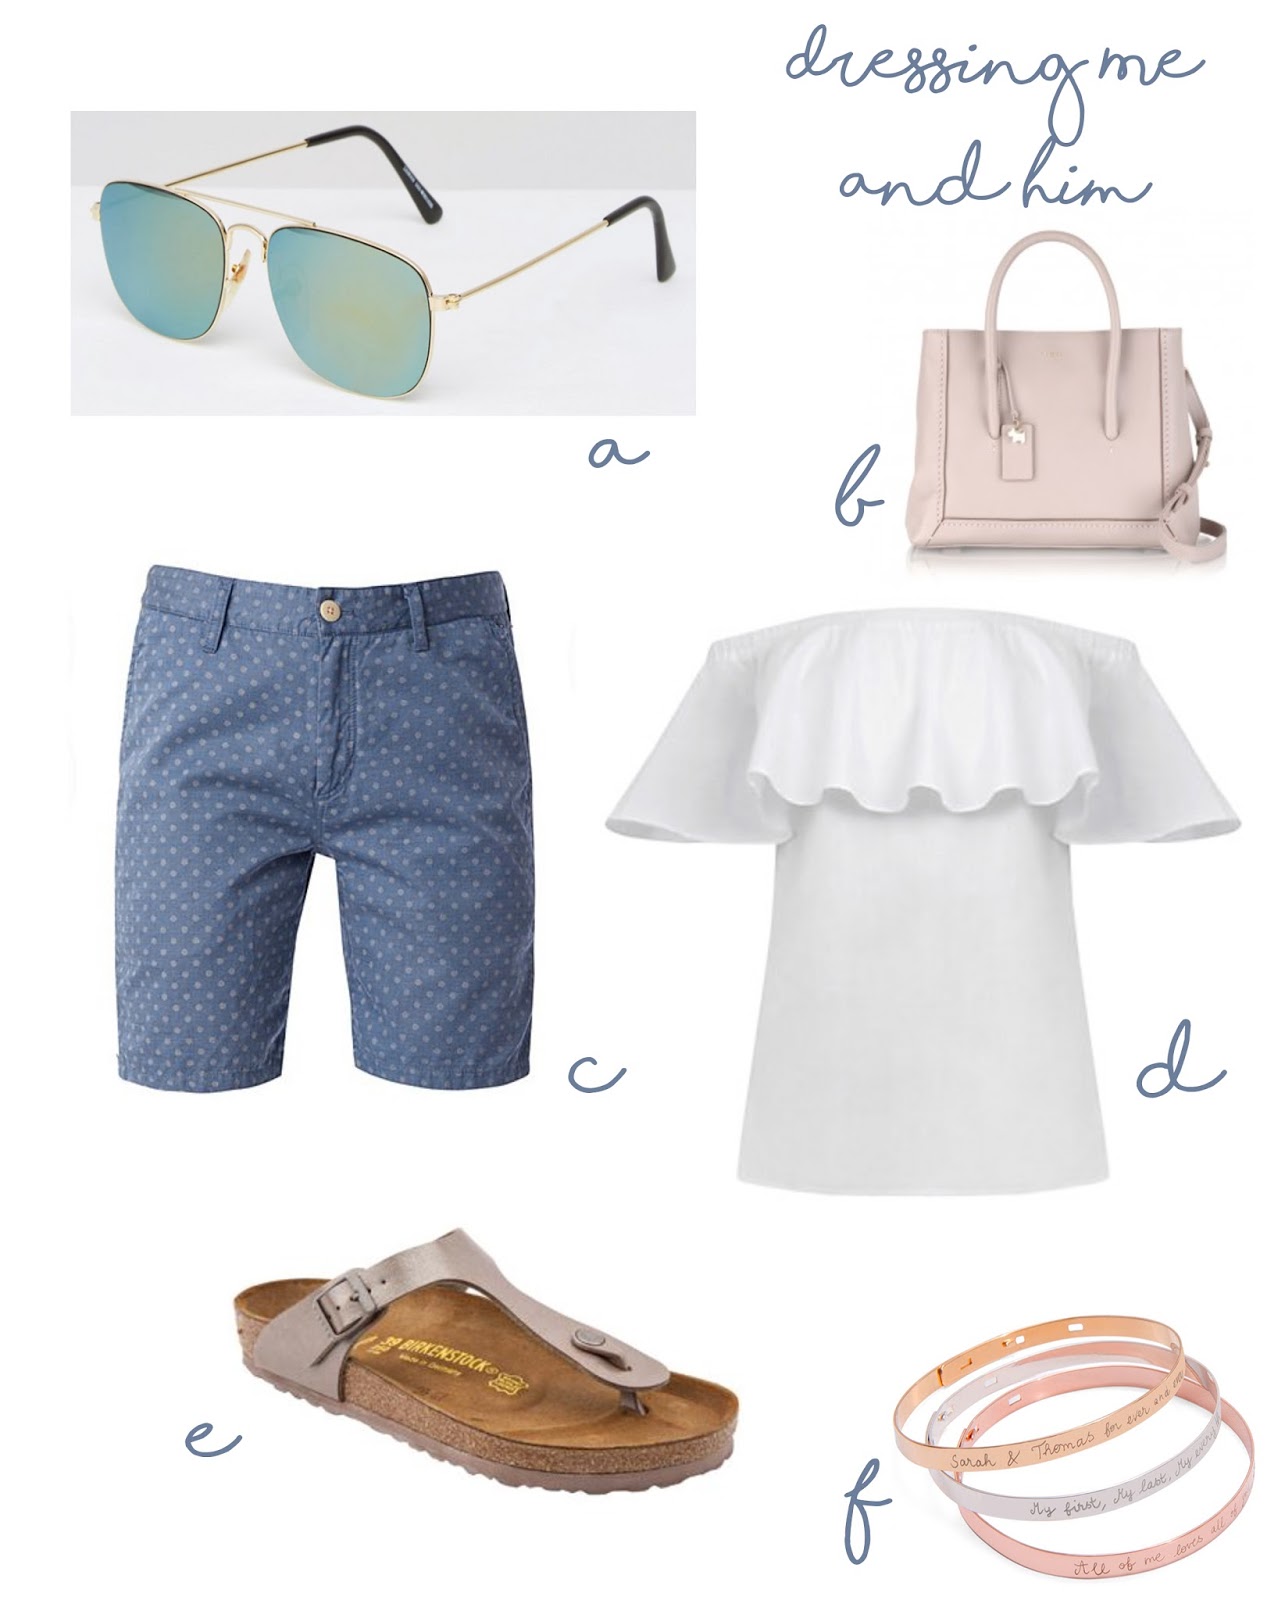 THE BBQ BLUES: NAUTICAL INSPIRATION FOR SUMMER